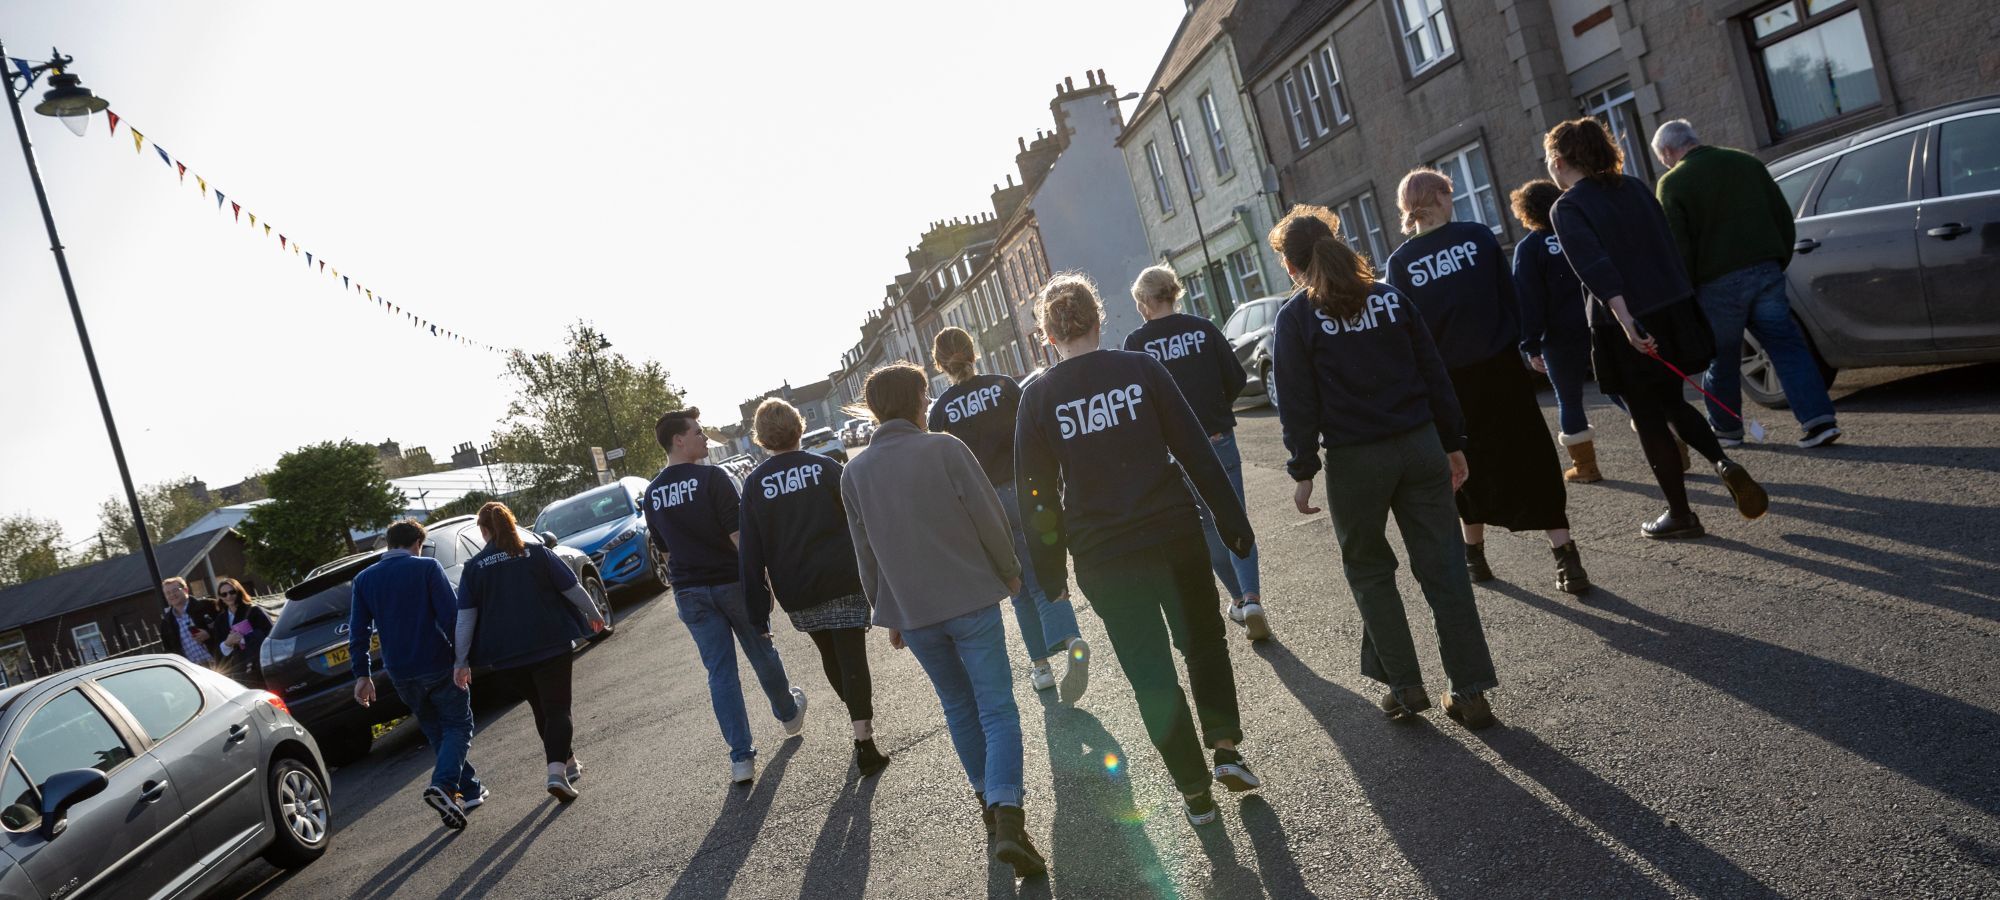 13 people, many wearing Wigtown Book Festival sweatshirts with 'Staff' written on the back, walk away from the camera. Low sunlight casts long shadows. They are walking down North Main street in Wigtown, with parked cars, building and bunting in the background.